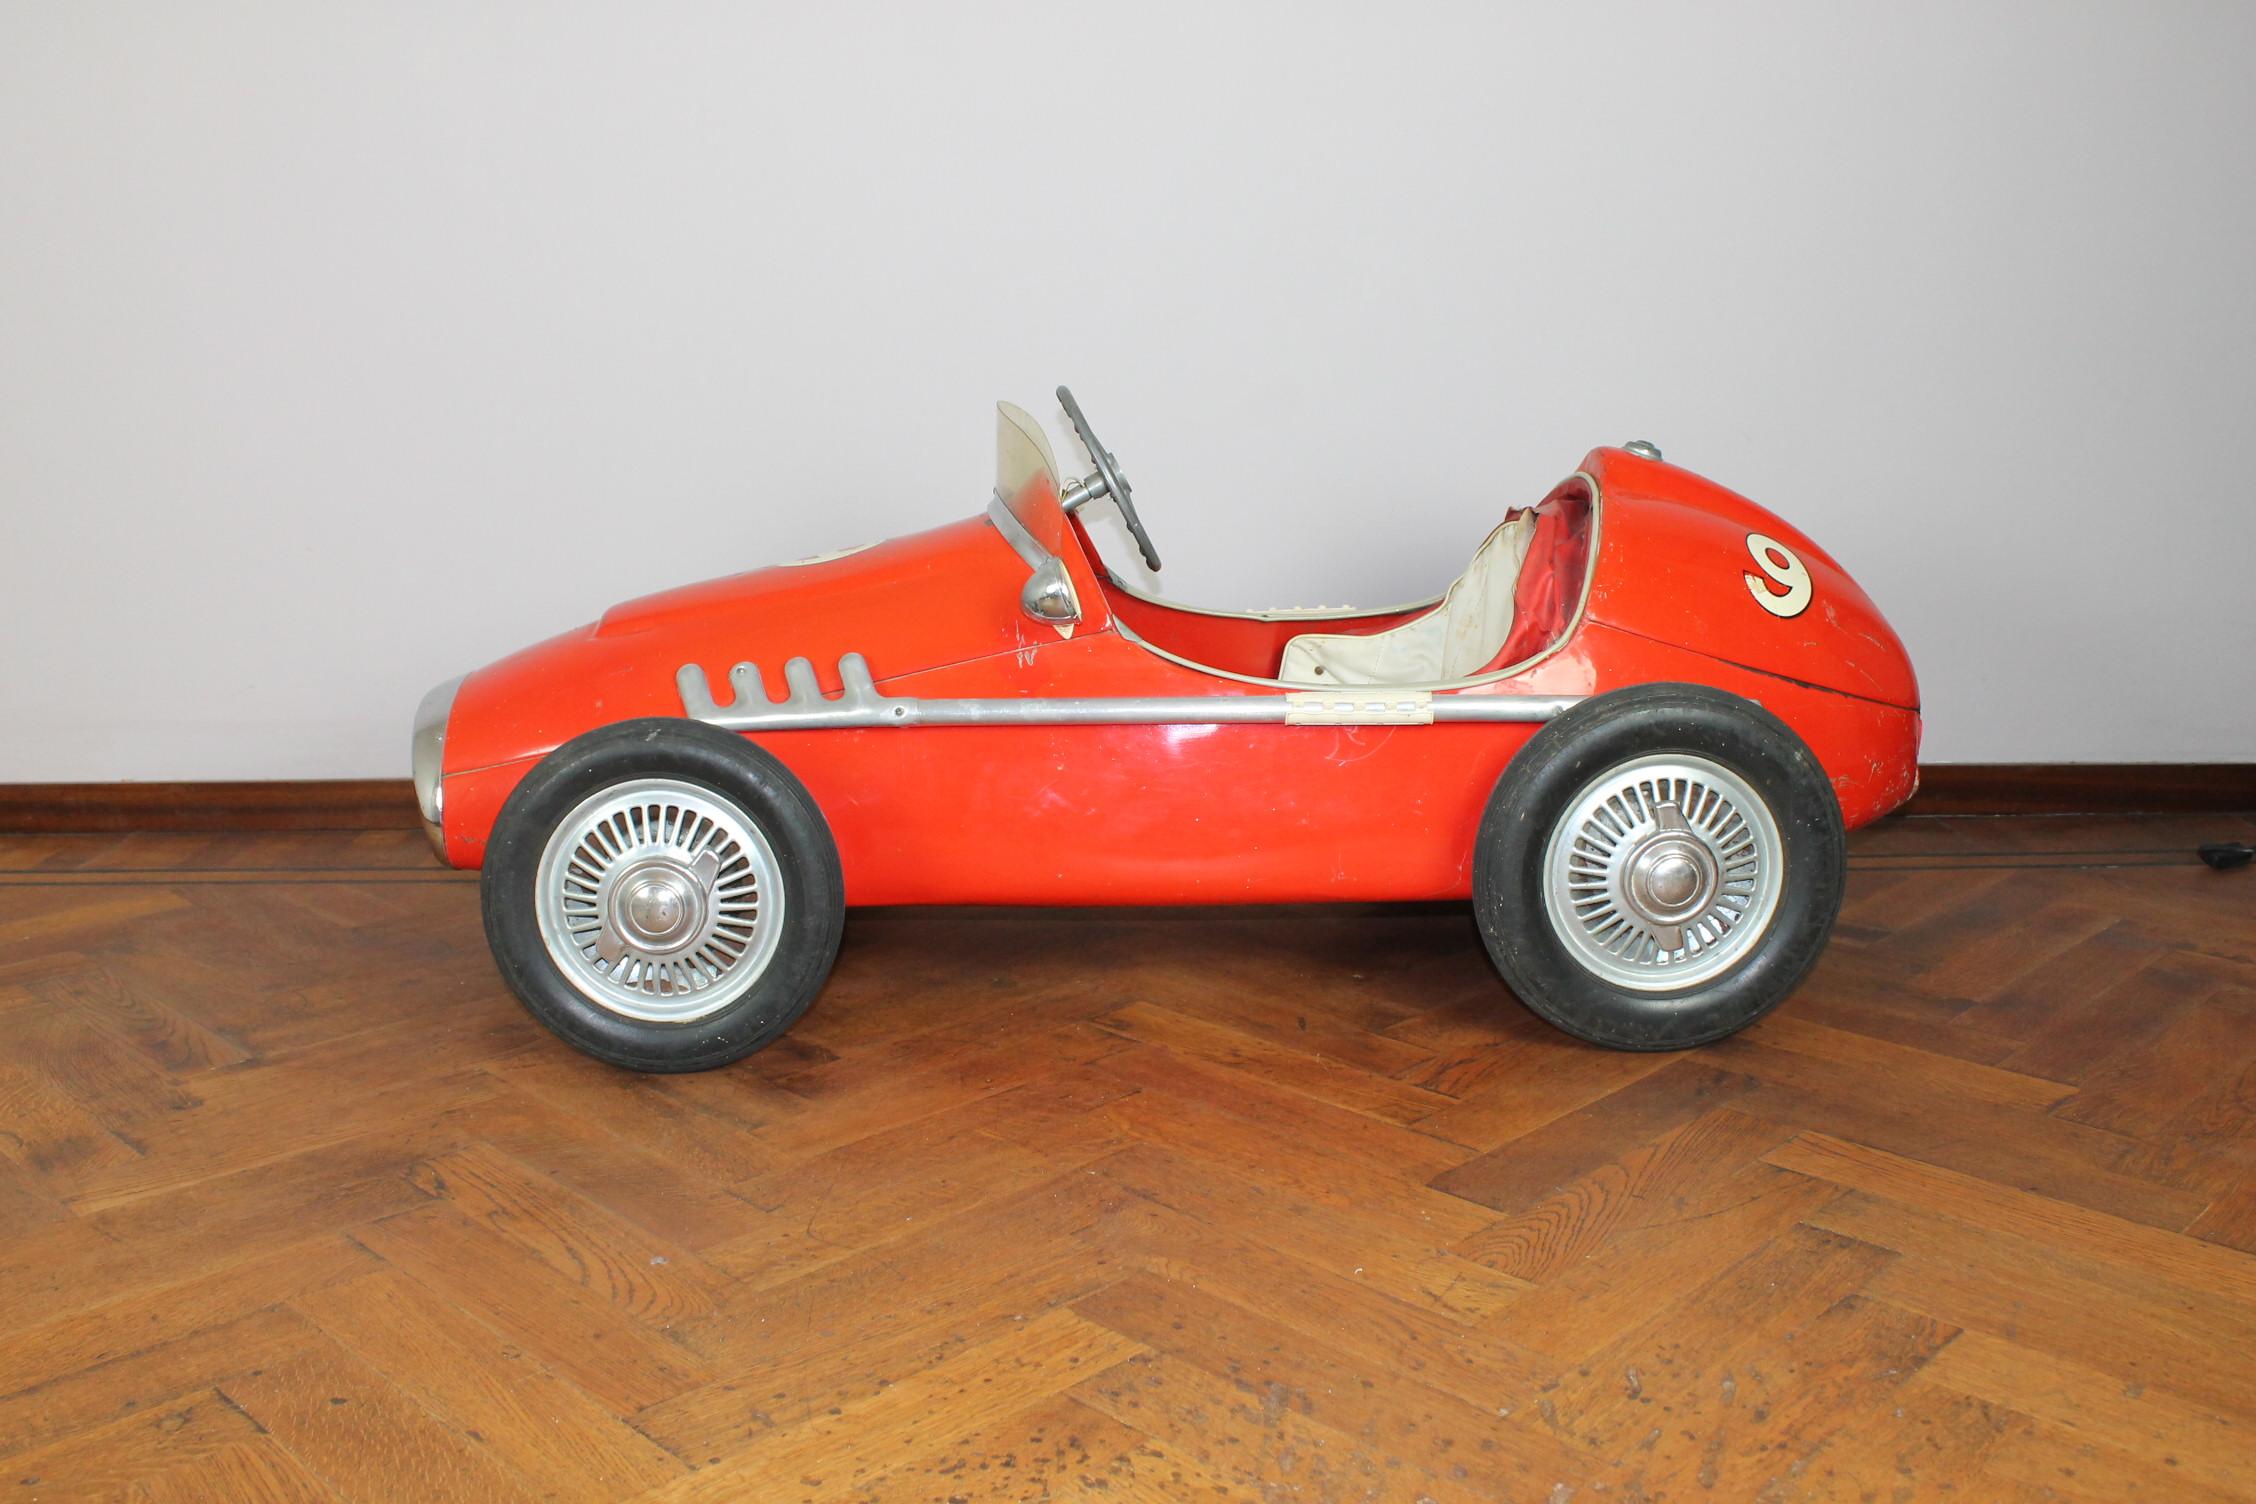 Stunning Large sized Vintage Ferrari Number 9 Pedal Car. 
This Child's Car Toy is made in Italy by Corrado & Remondini in the 1950s.
They called it the Indianapolis by C & R as it was similar to the Giordani Racer .  
The large radiator with working